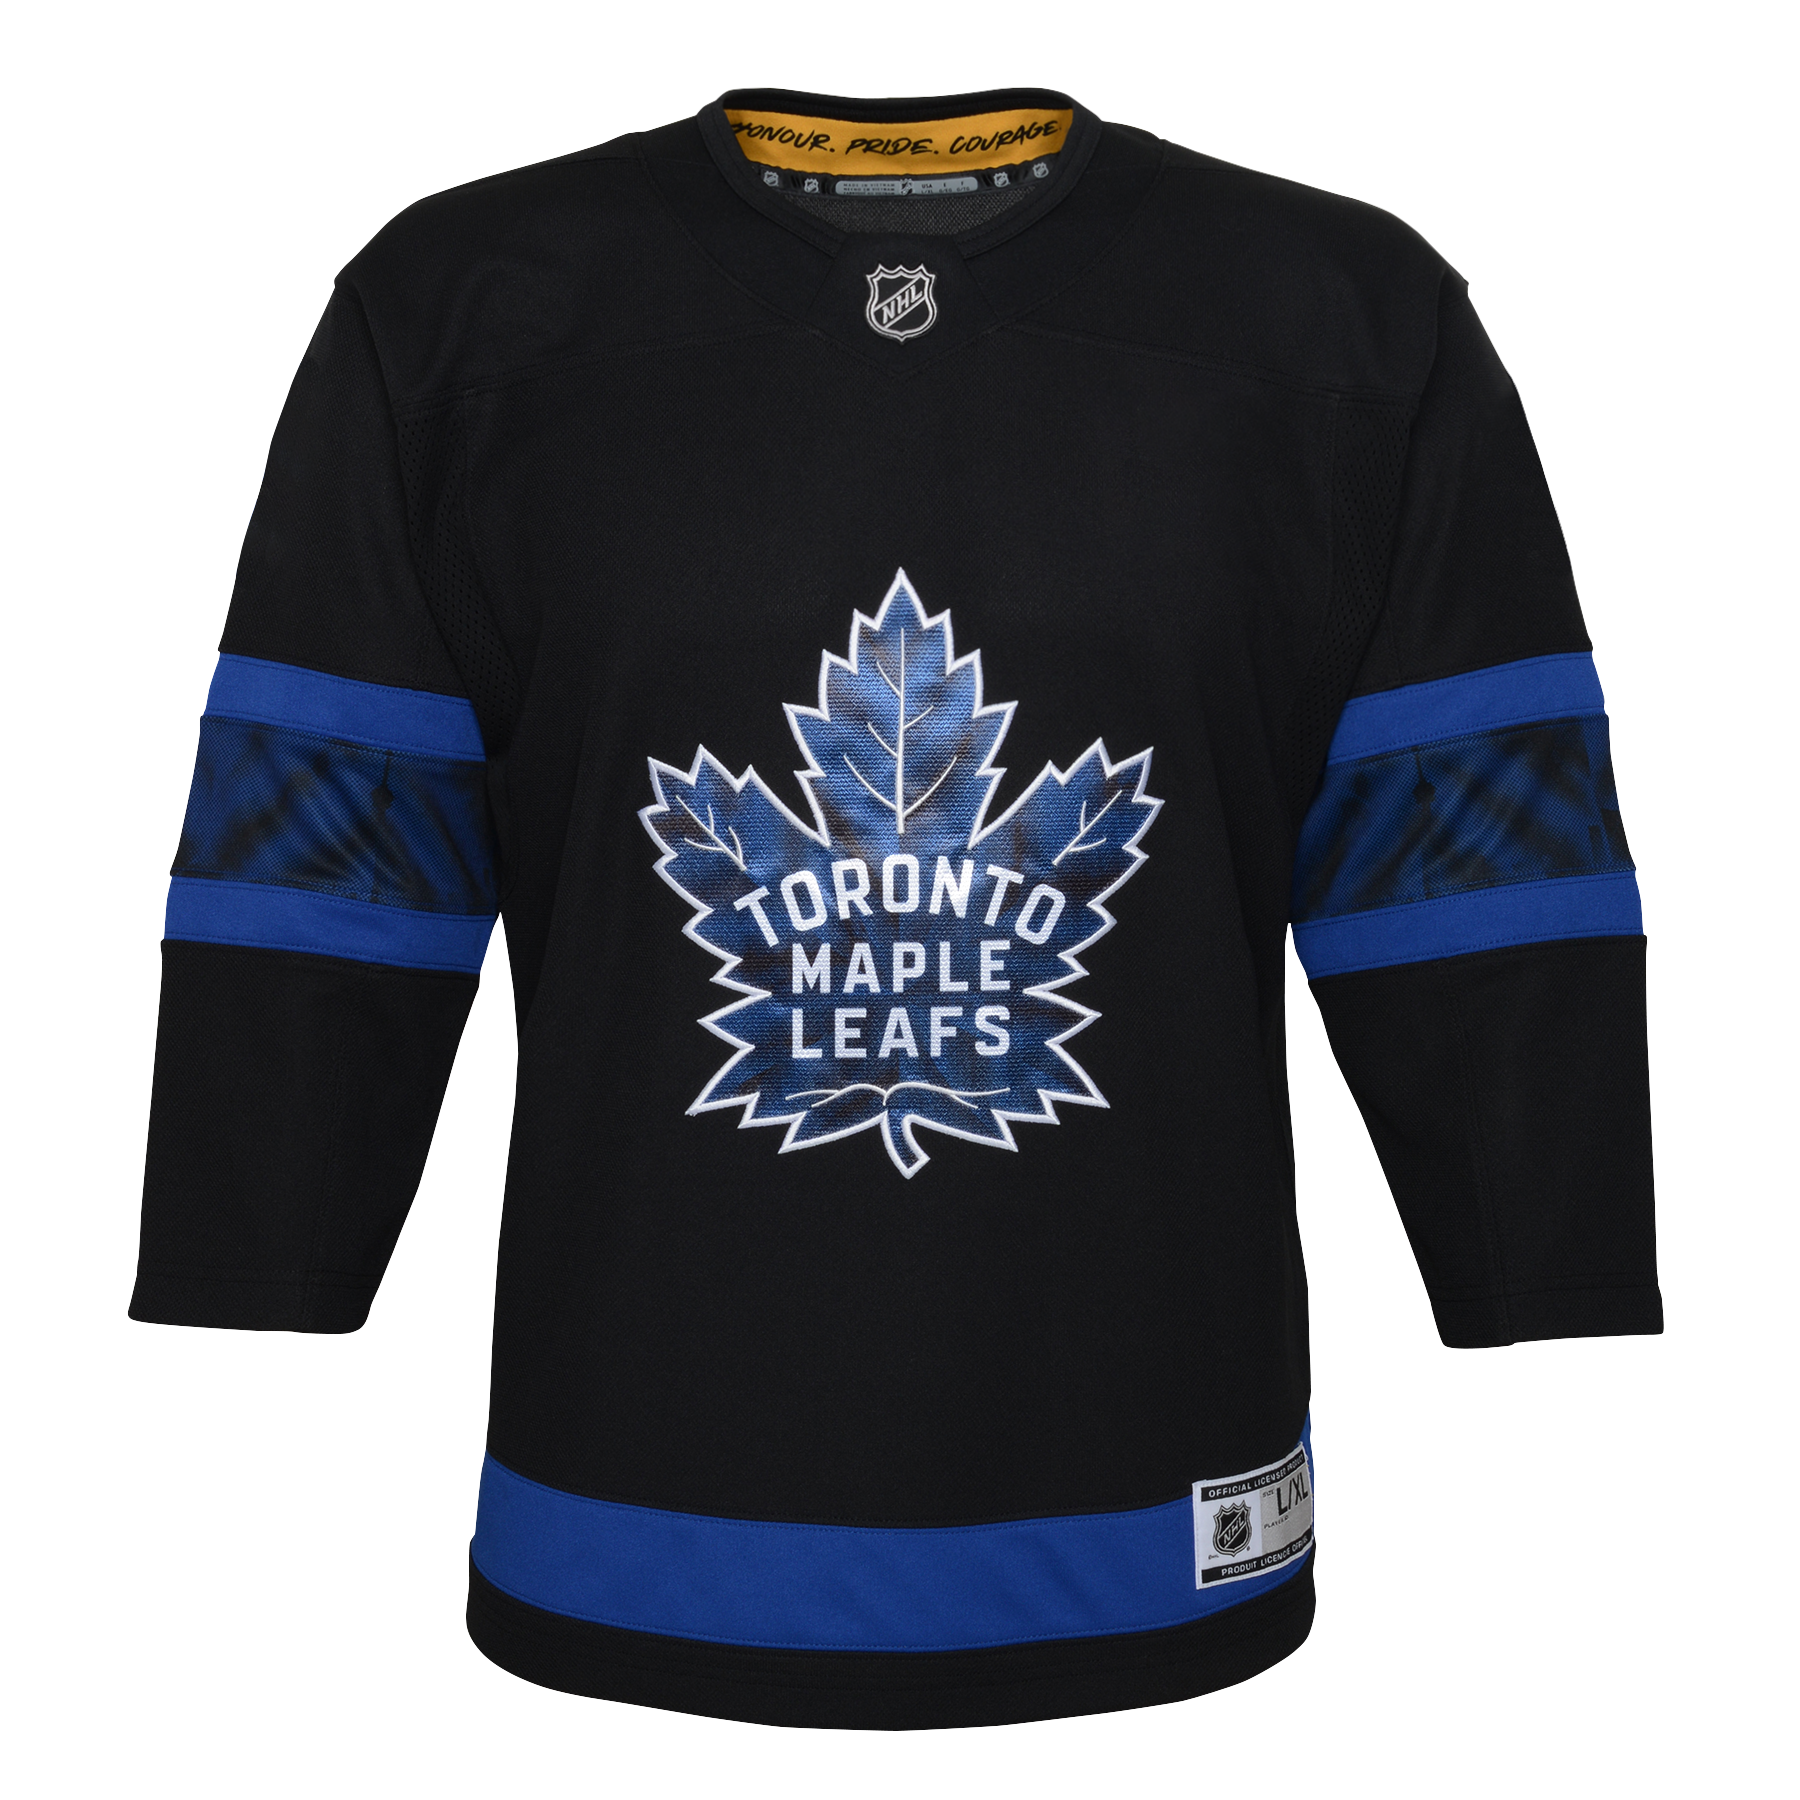 UNISWAG - Grab your official Toronto Maple Leafs x drew house Flipside  jersey here:  #uniswag